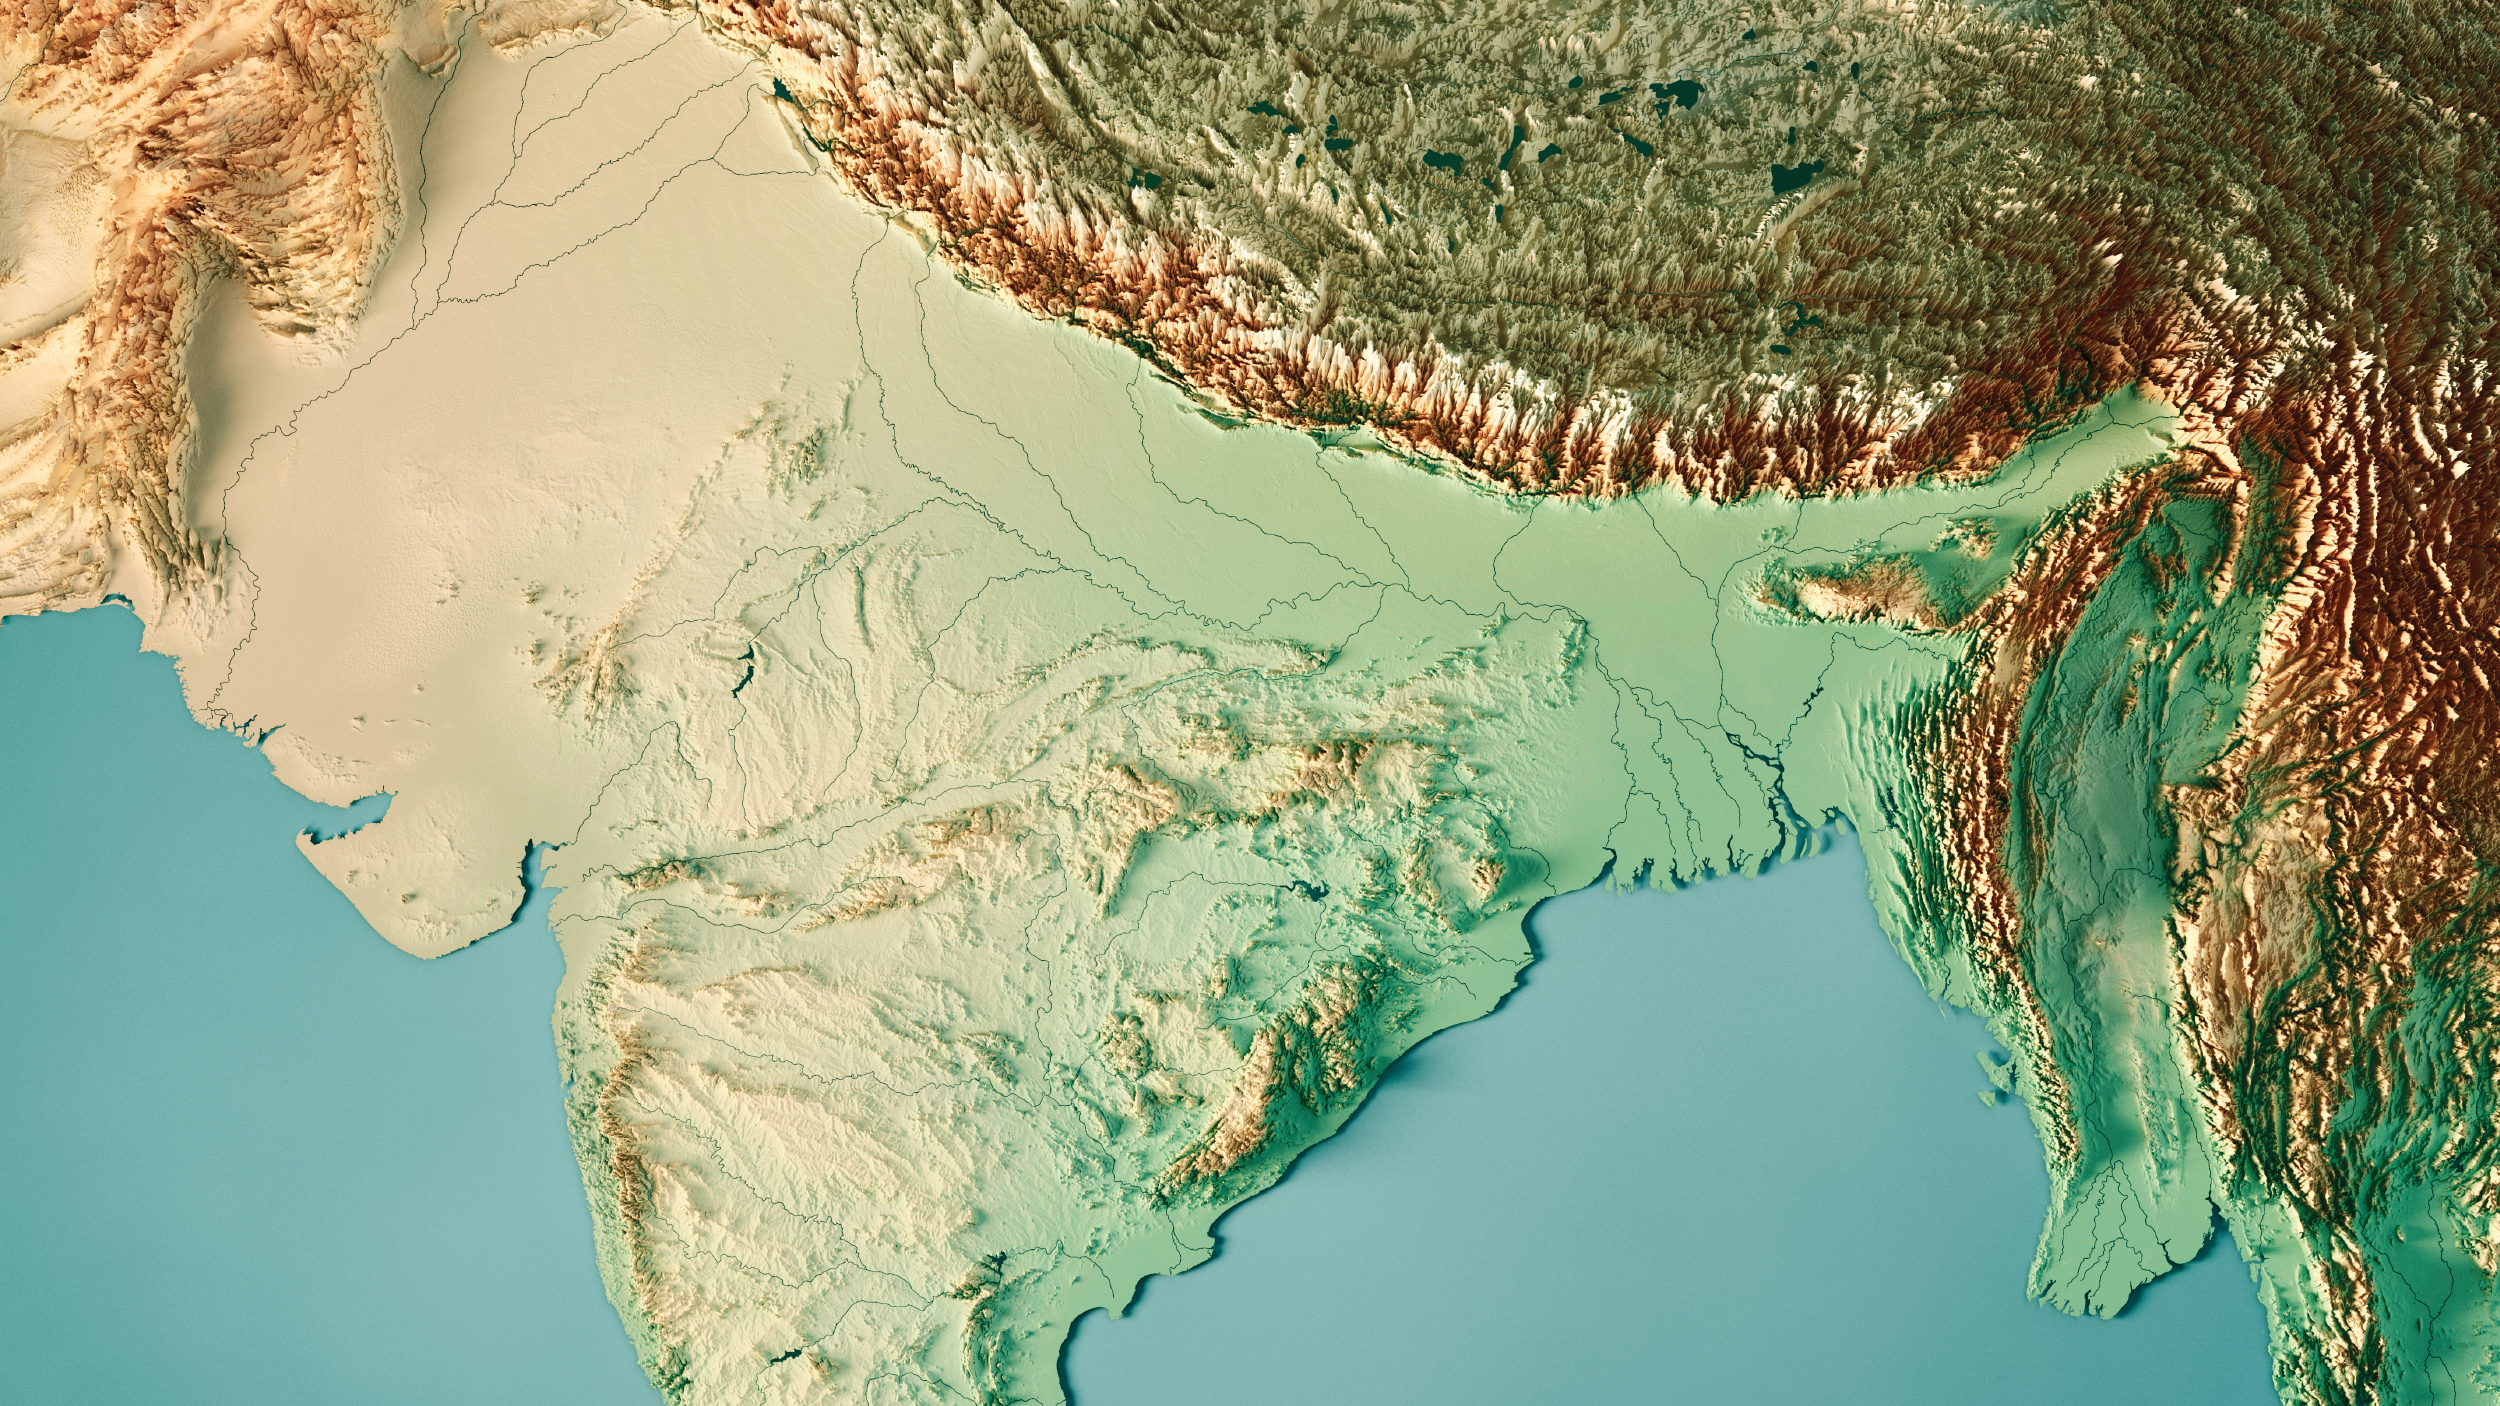 Bangladesh: One of South Asia’s Exploration Frontiers